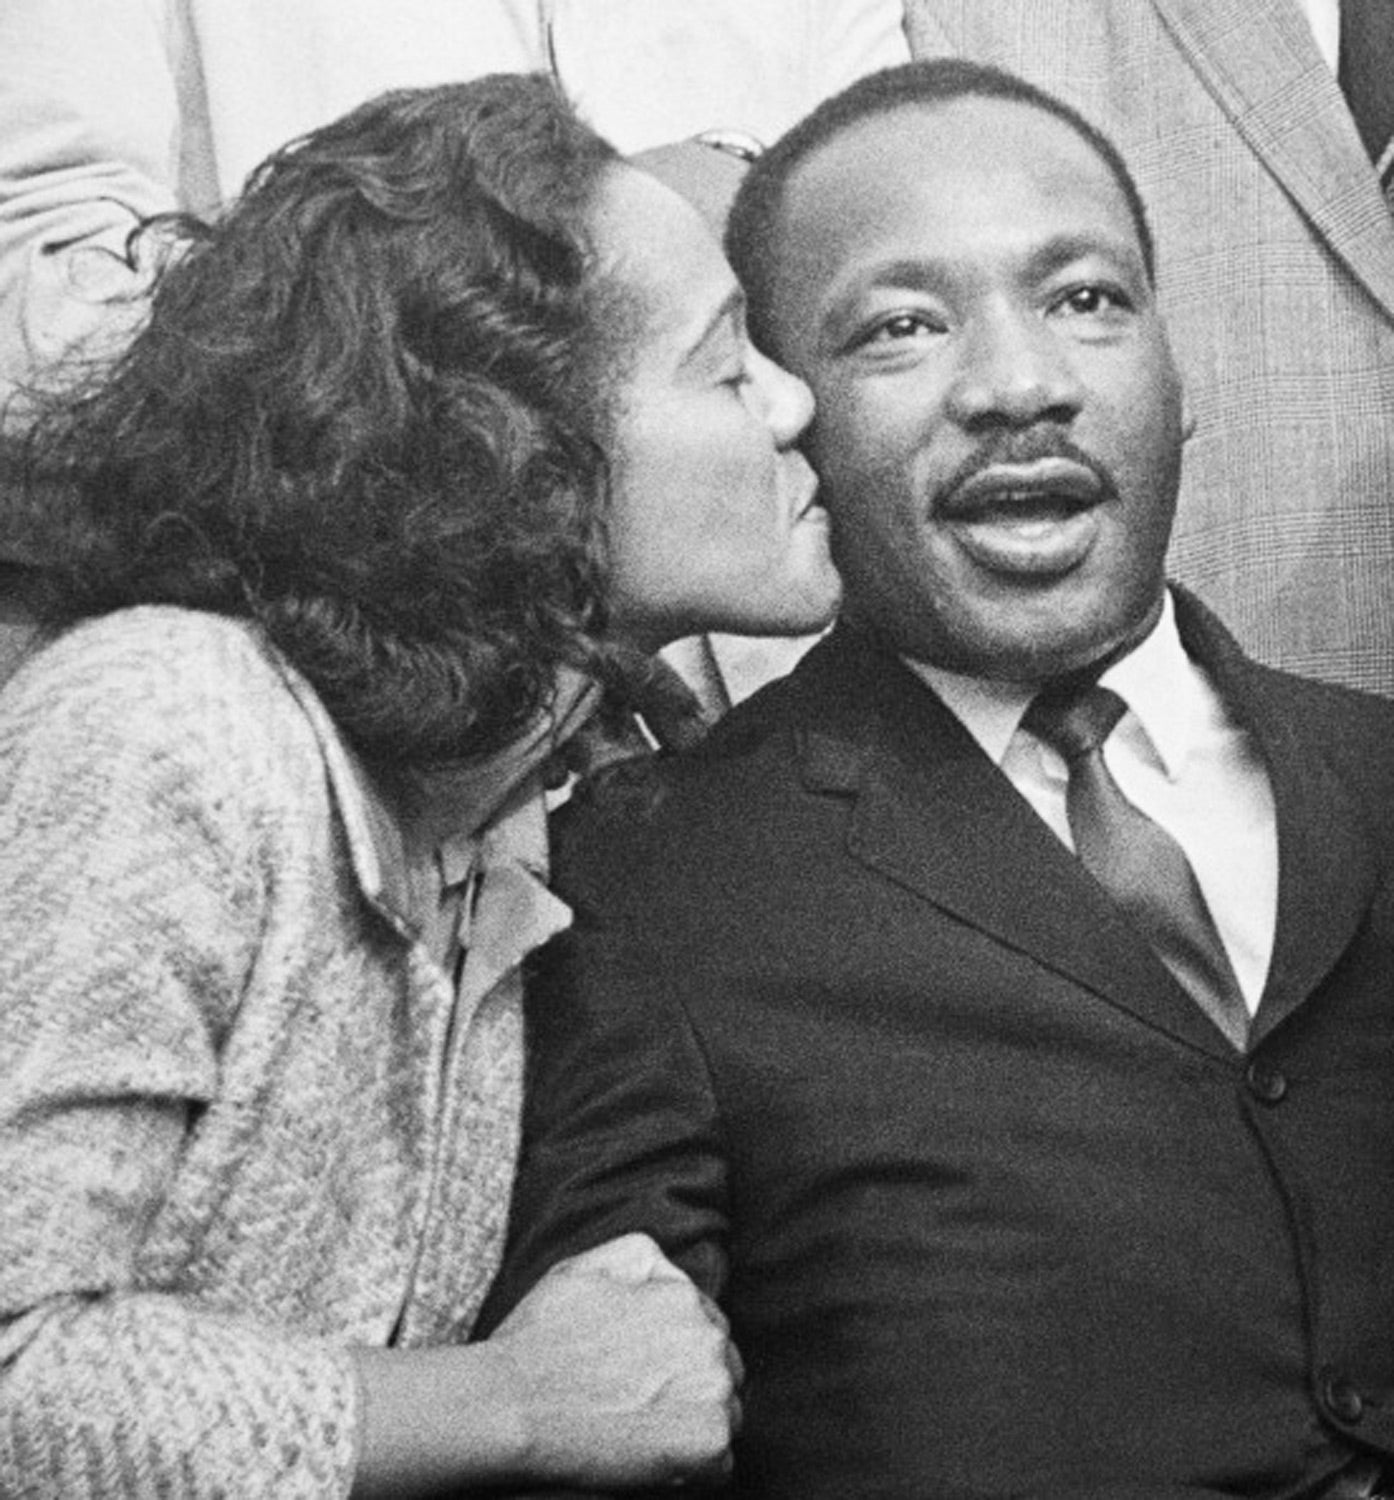 15 Photos That Show Martin Luther King Jr. and Coretta Scott King’s Iconic Love